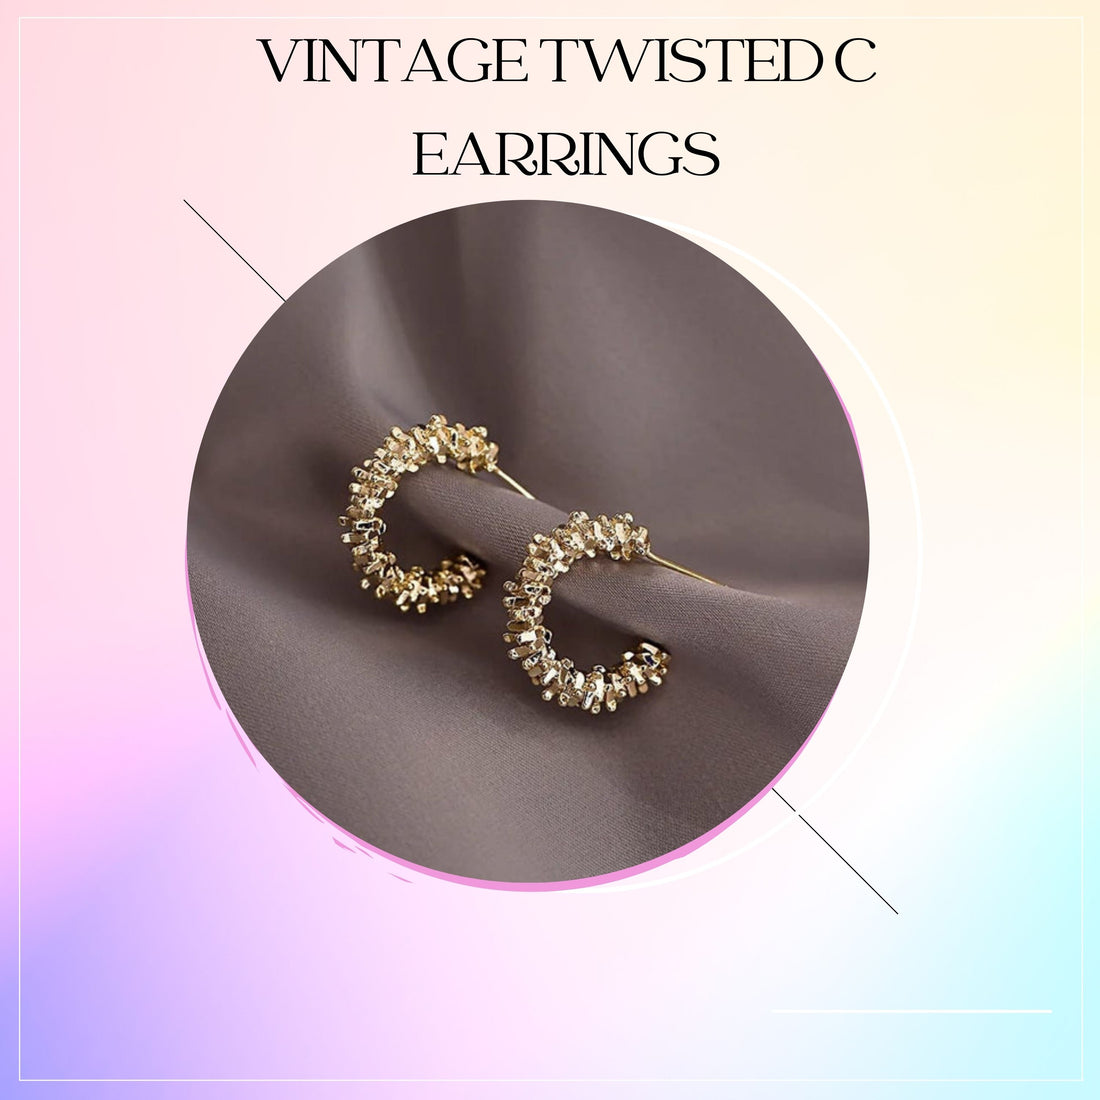 Vintage Twisted C Earrings - All You Need to Boost Your Confidence This Season